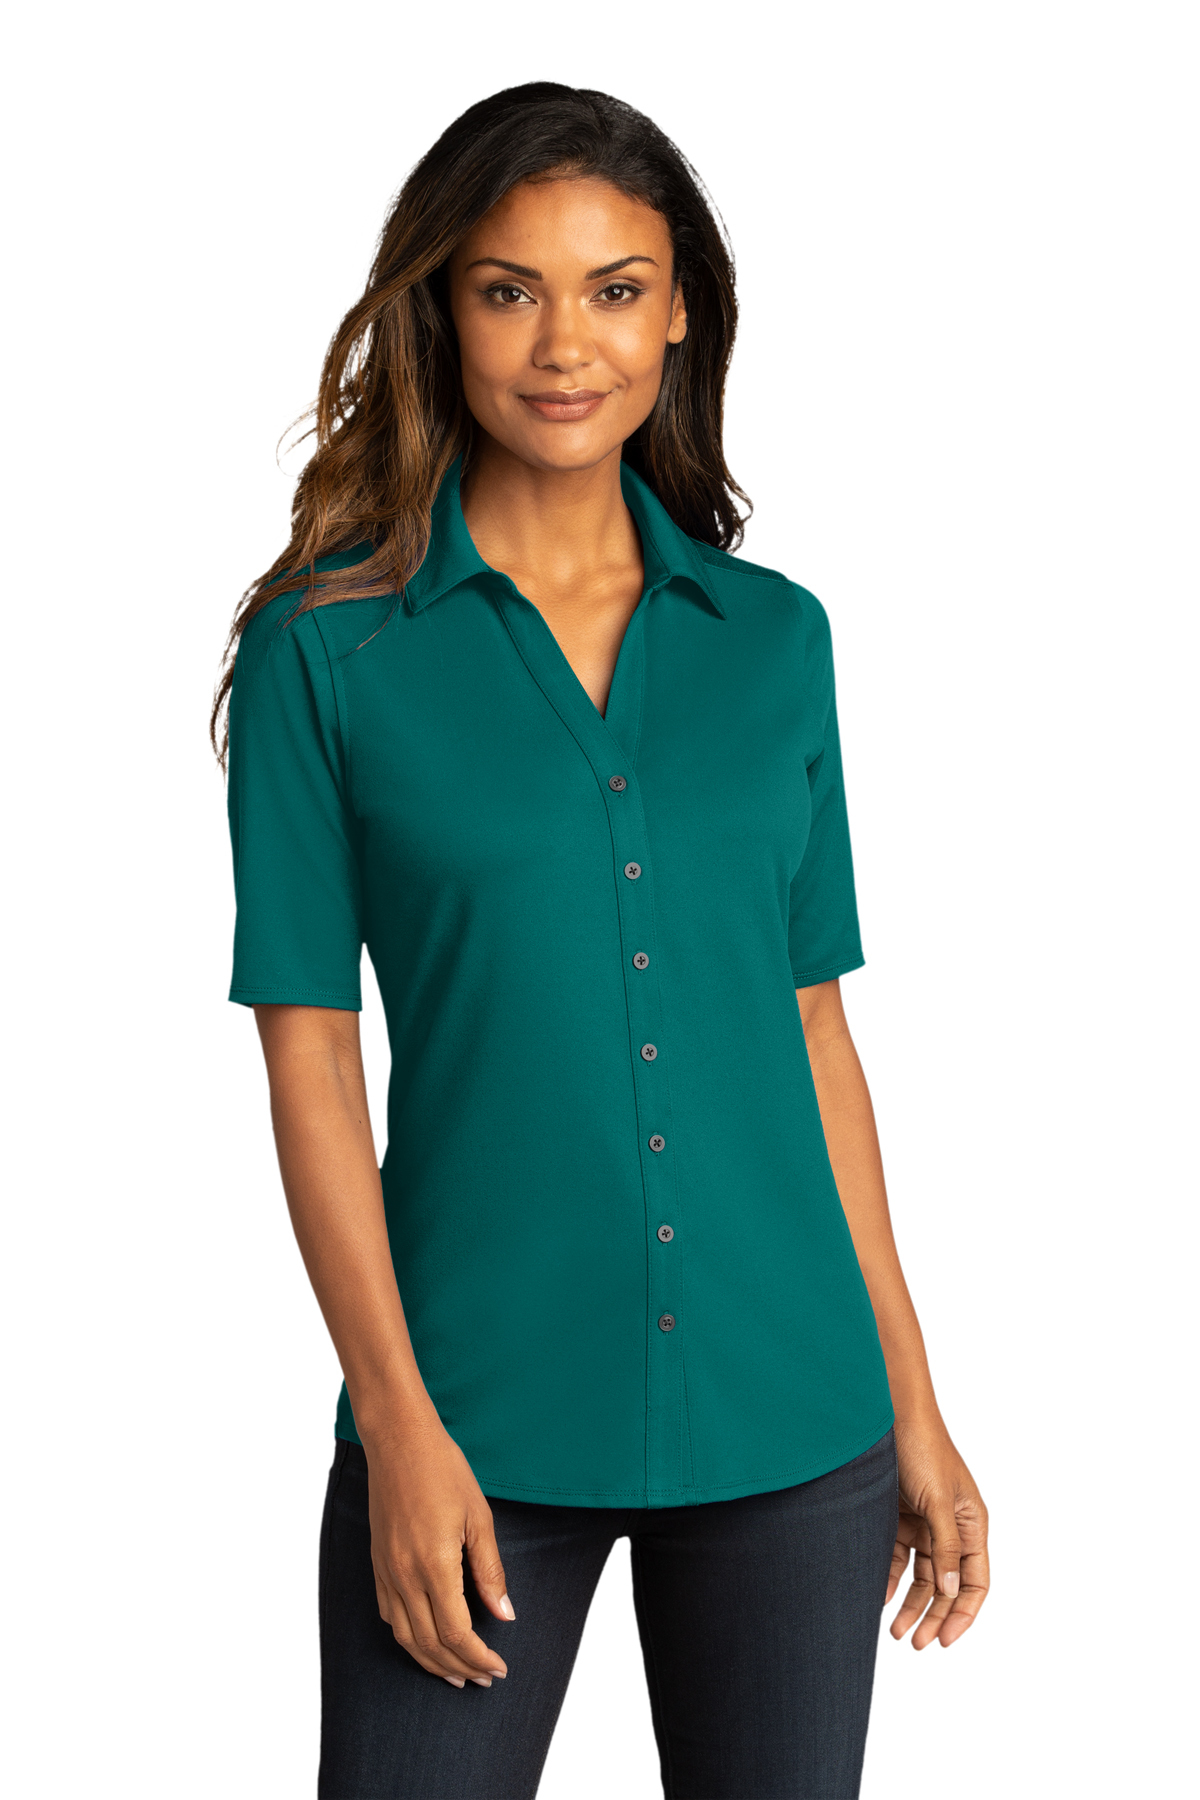 click to view Dark Teal